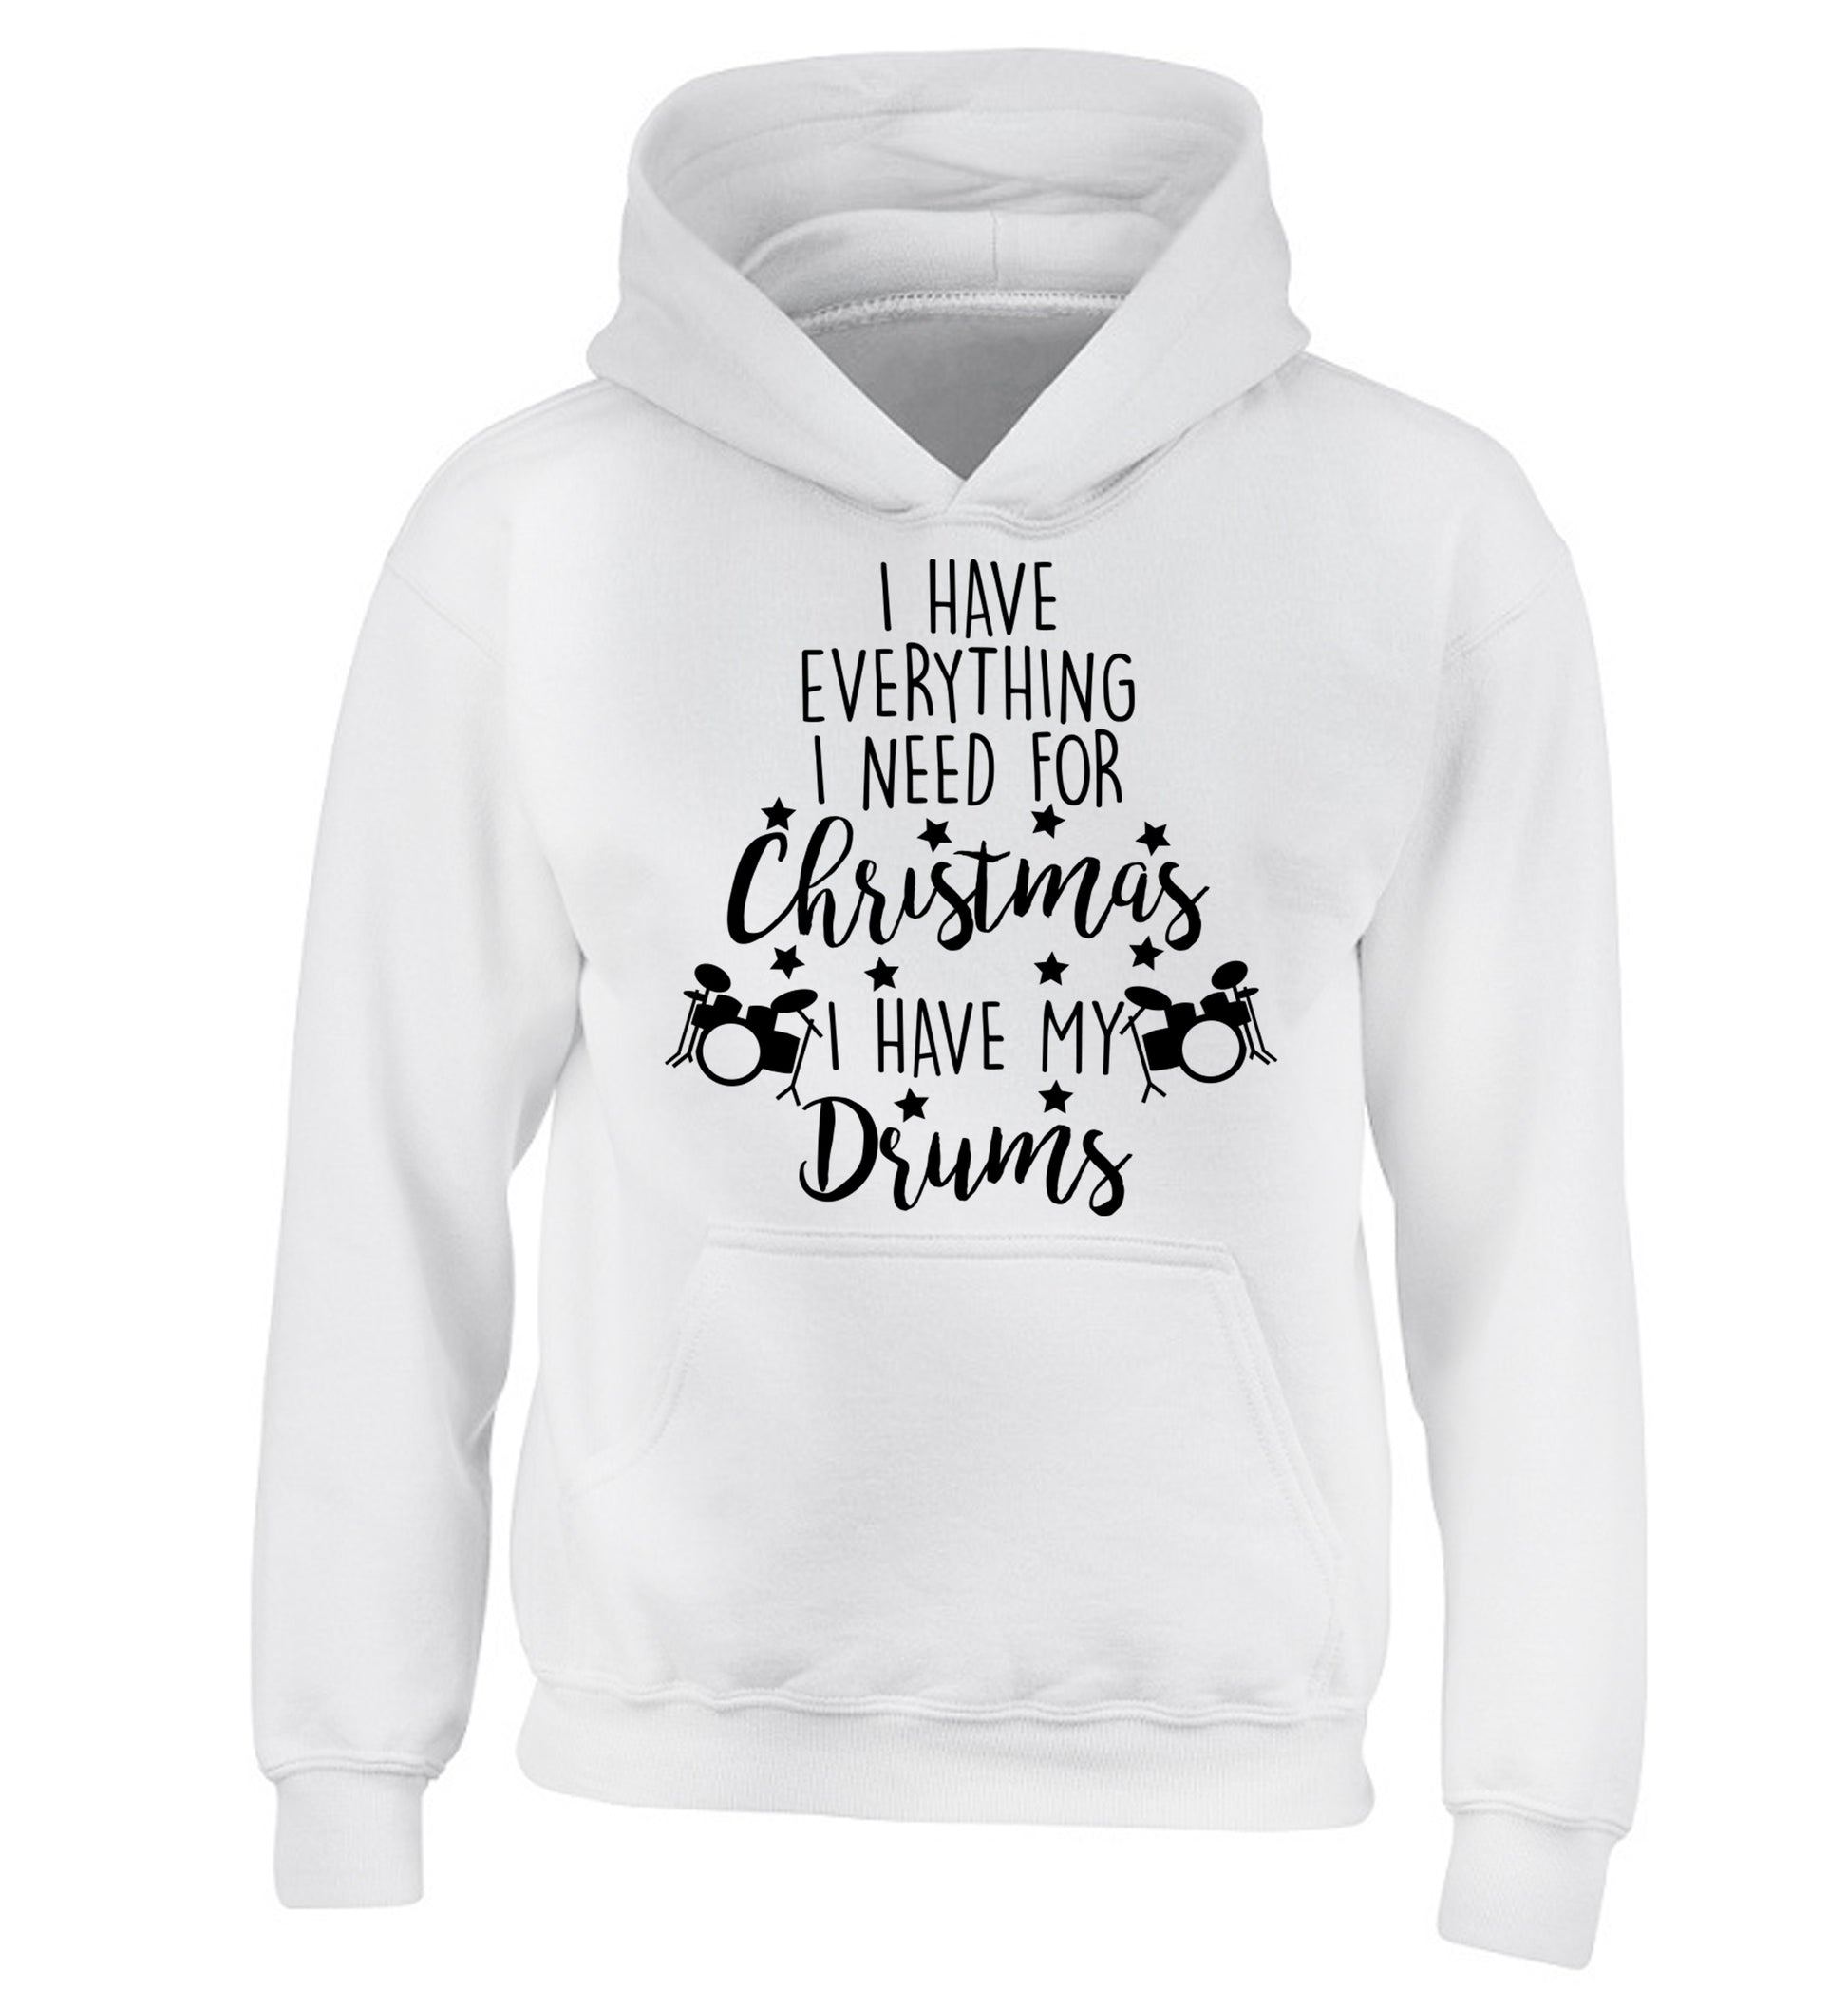 I have everything I need for Christmas I have my drums! children's white hoodie 12-14 Years